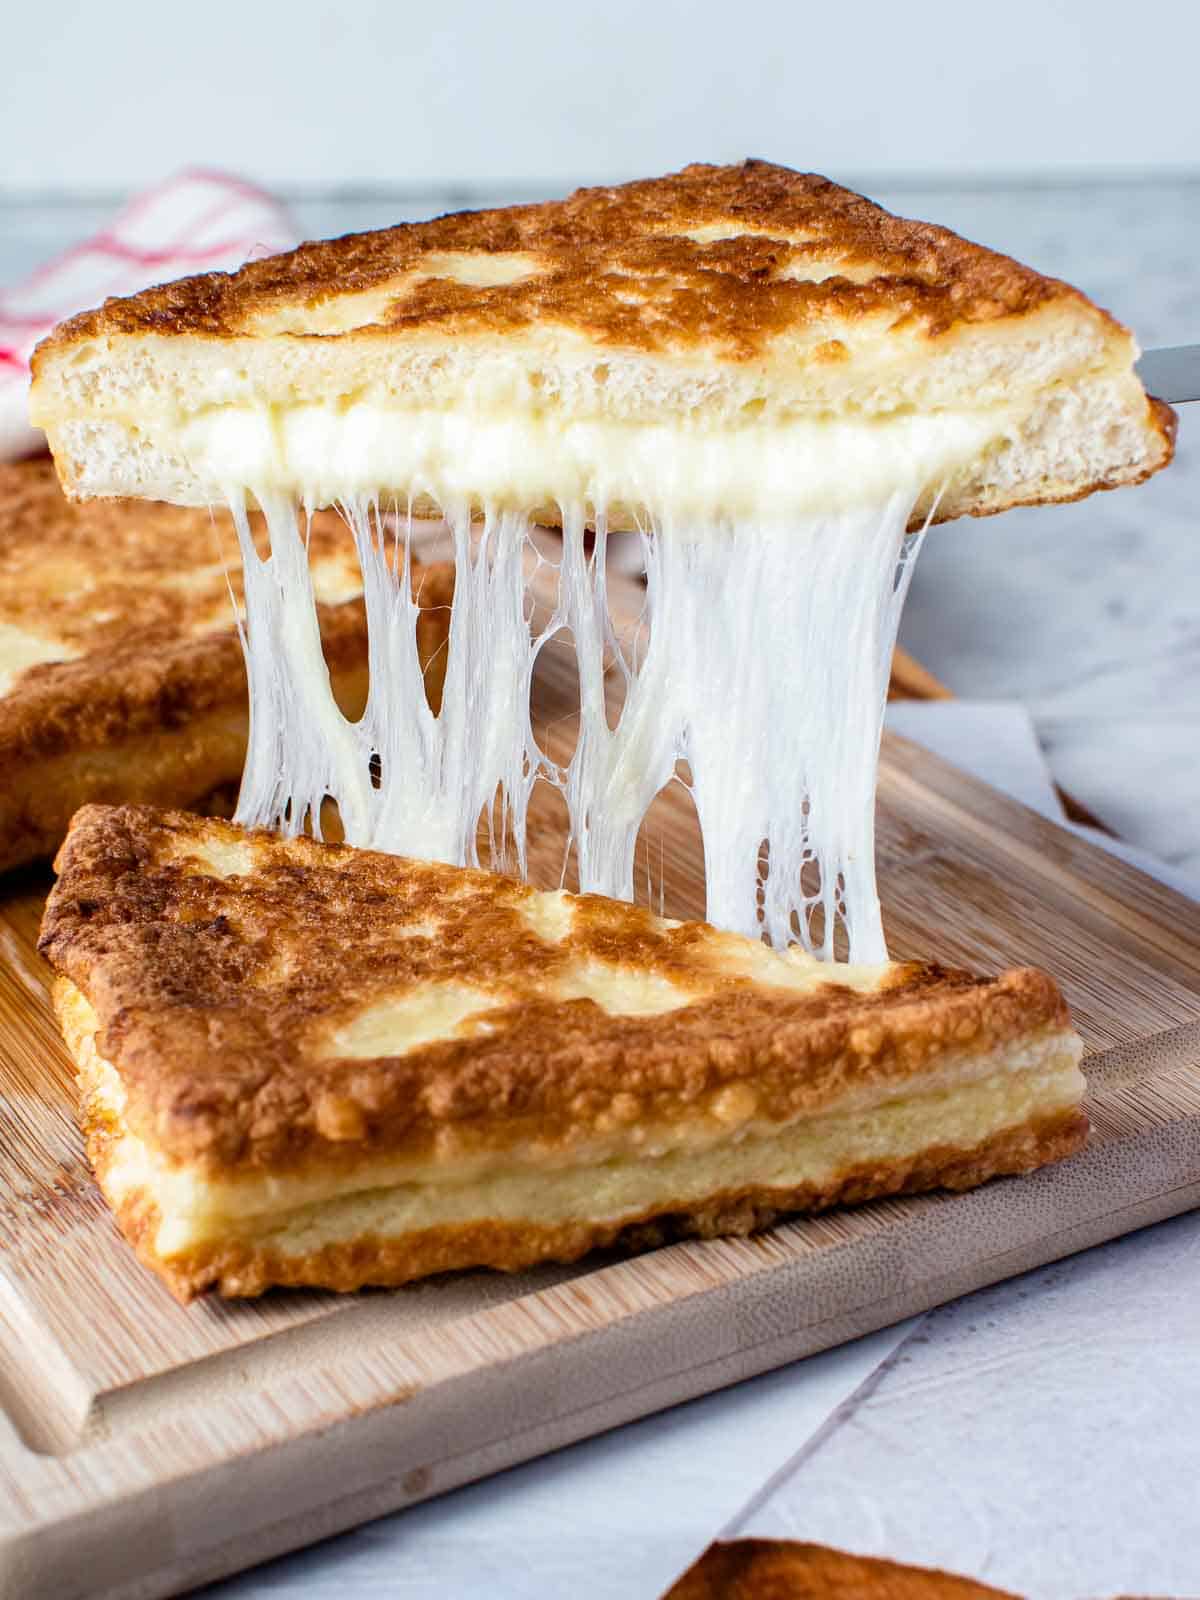 fried cheese sandwich cut in half and showing cheese pull.